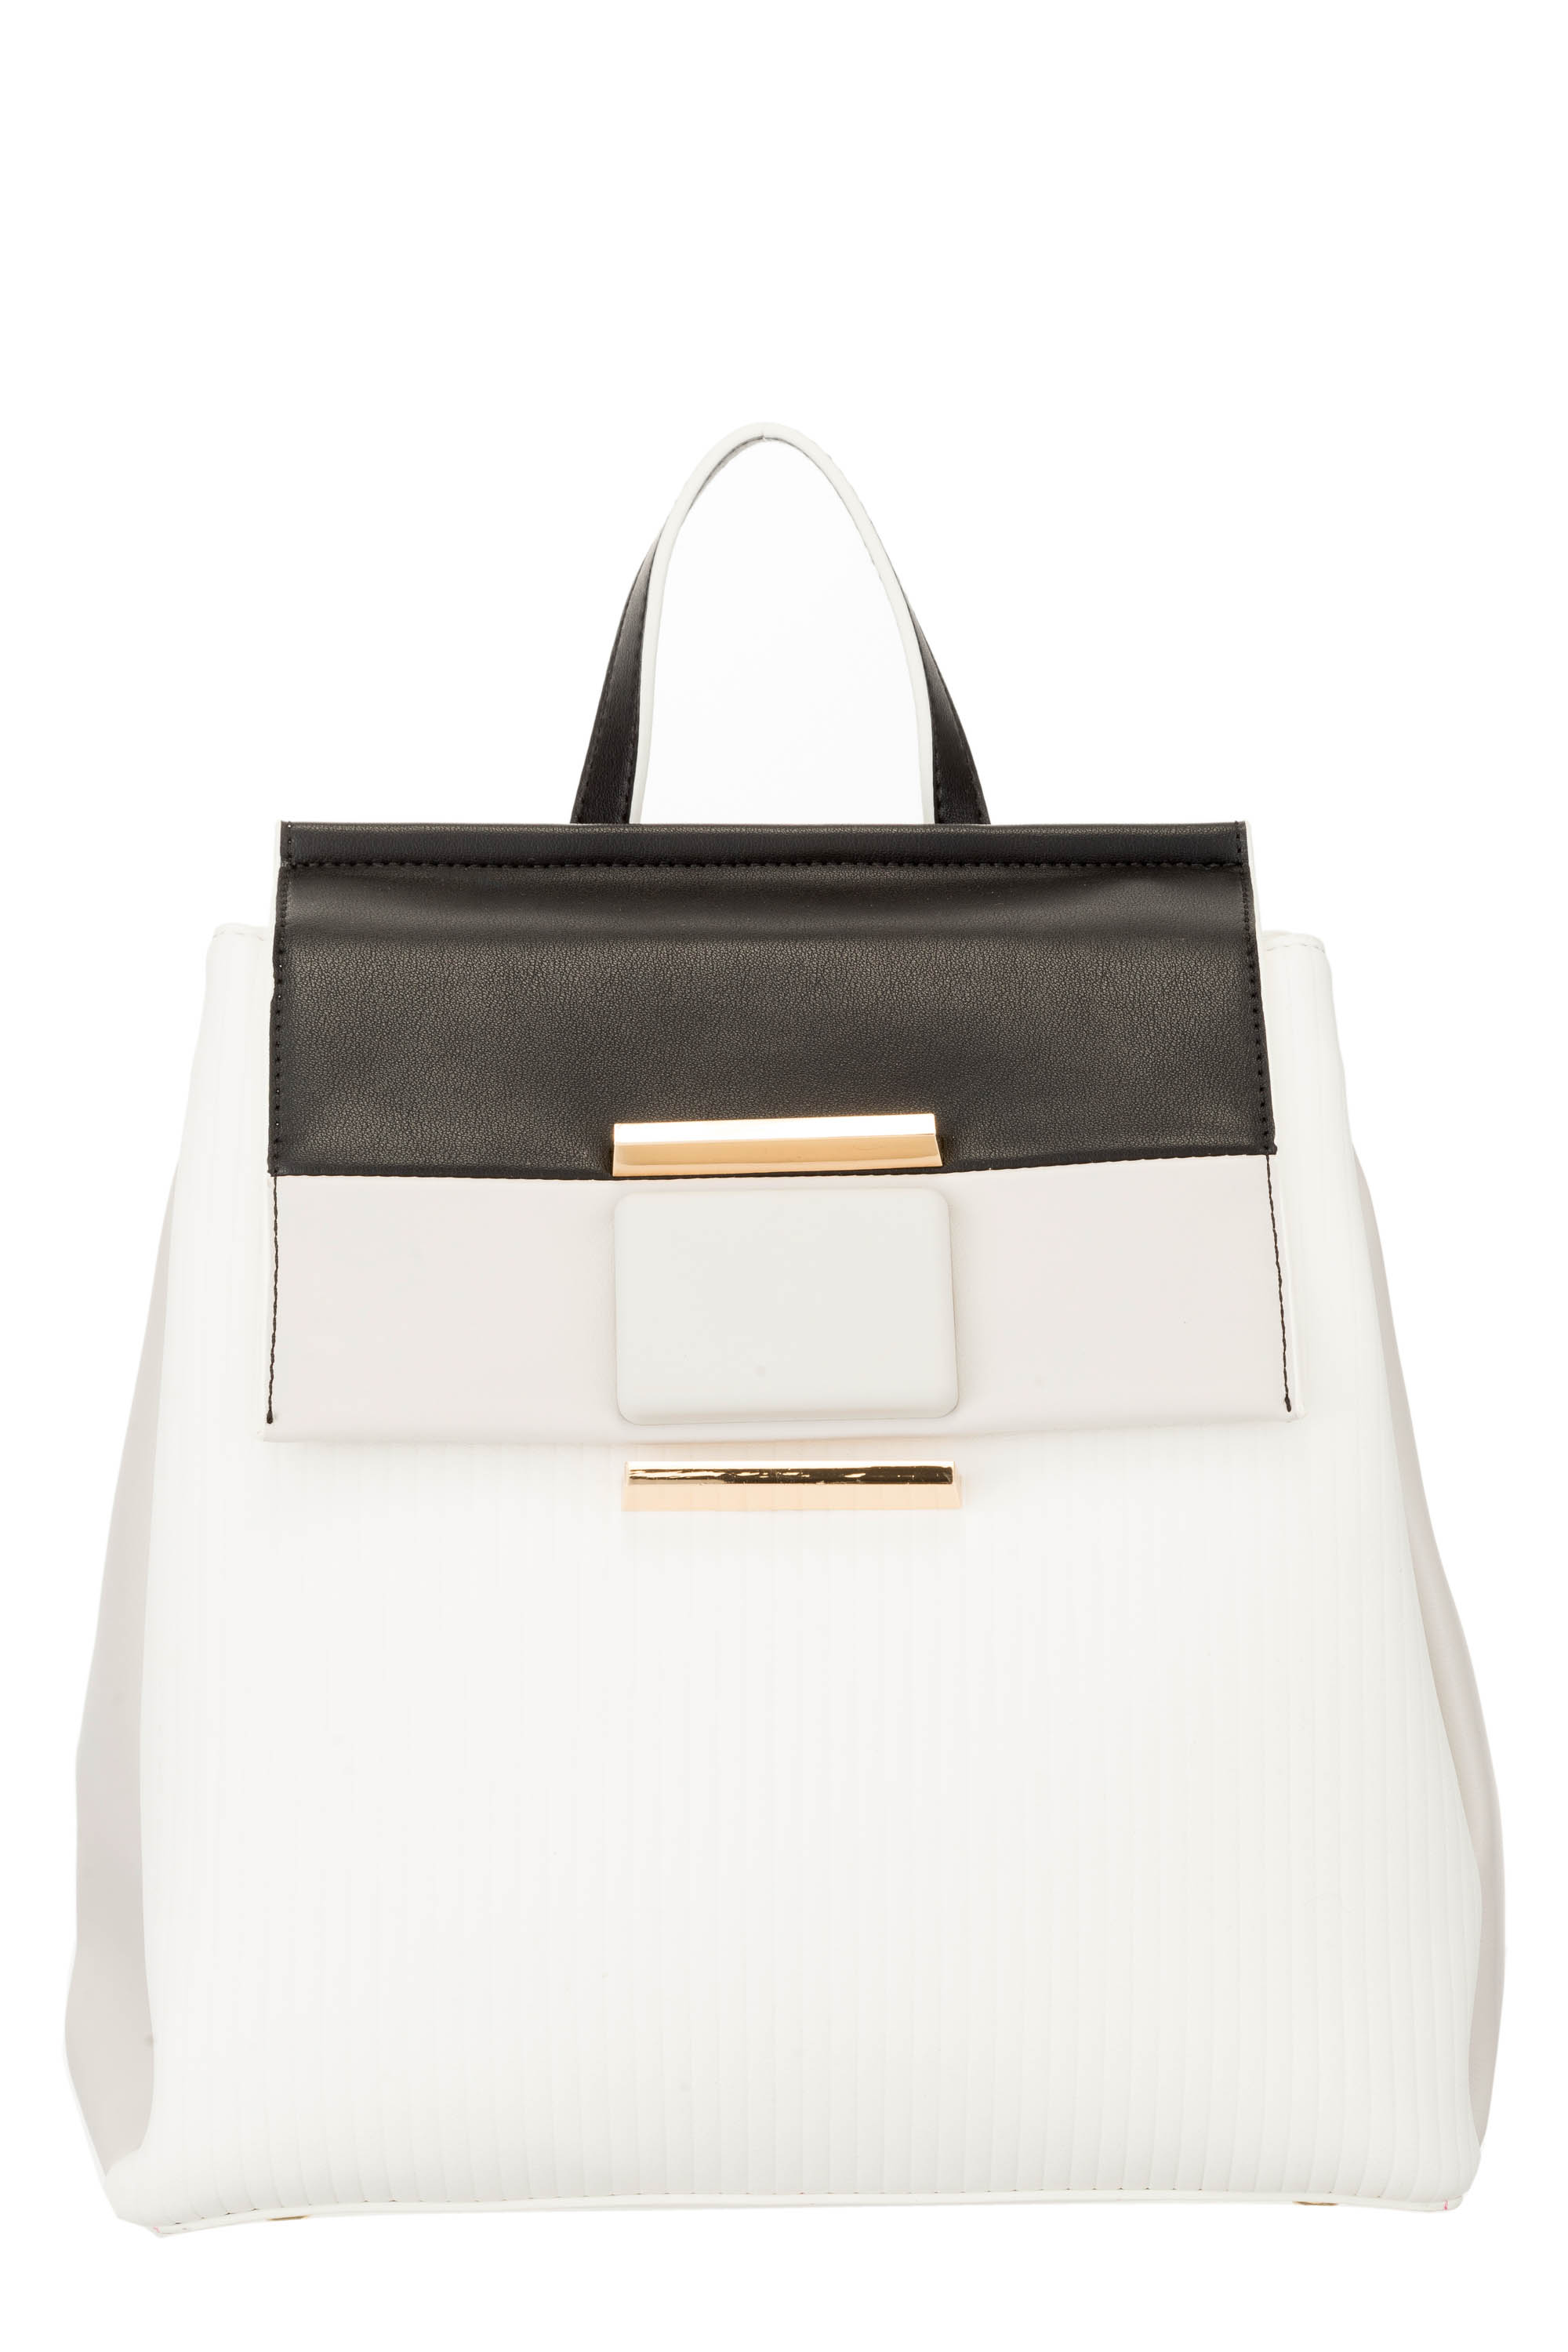 BACKPACK WHITE - STYLE1650